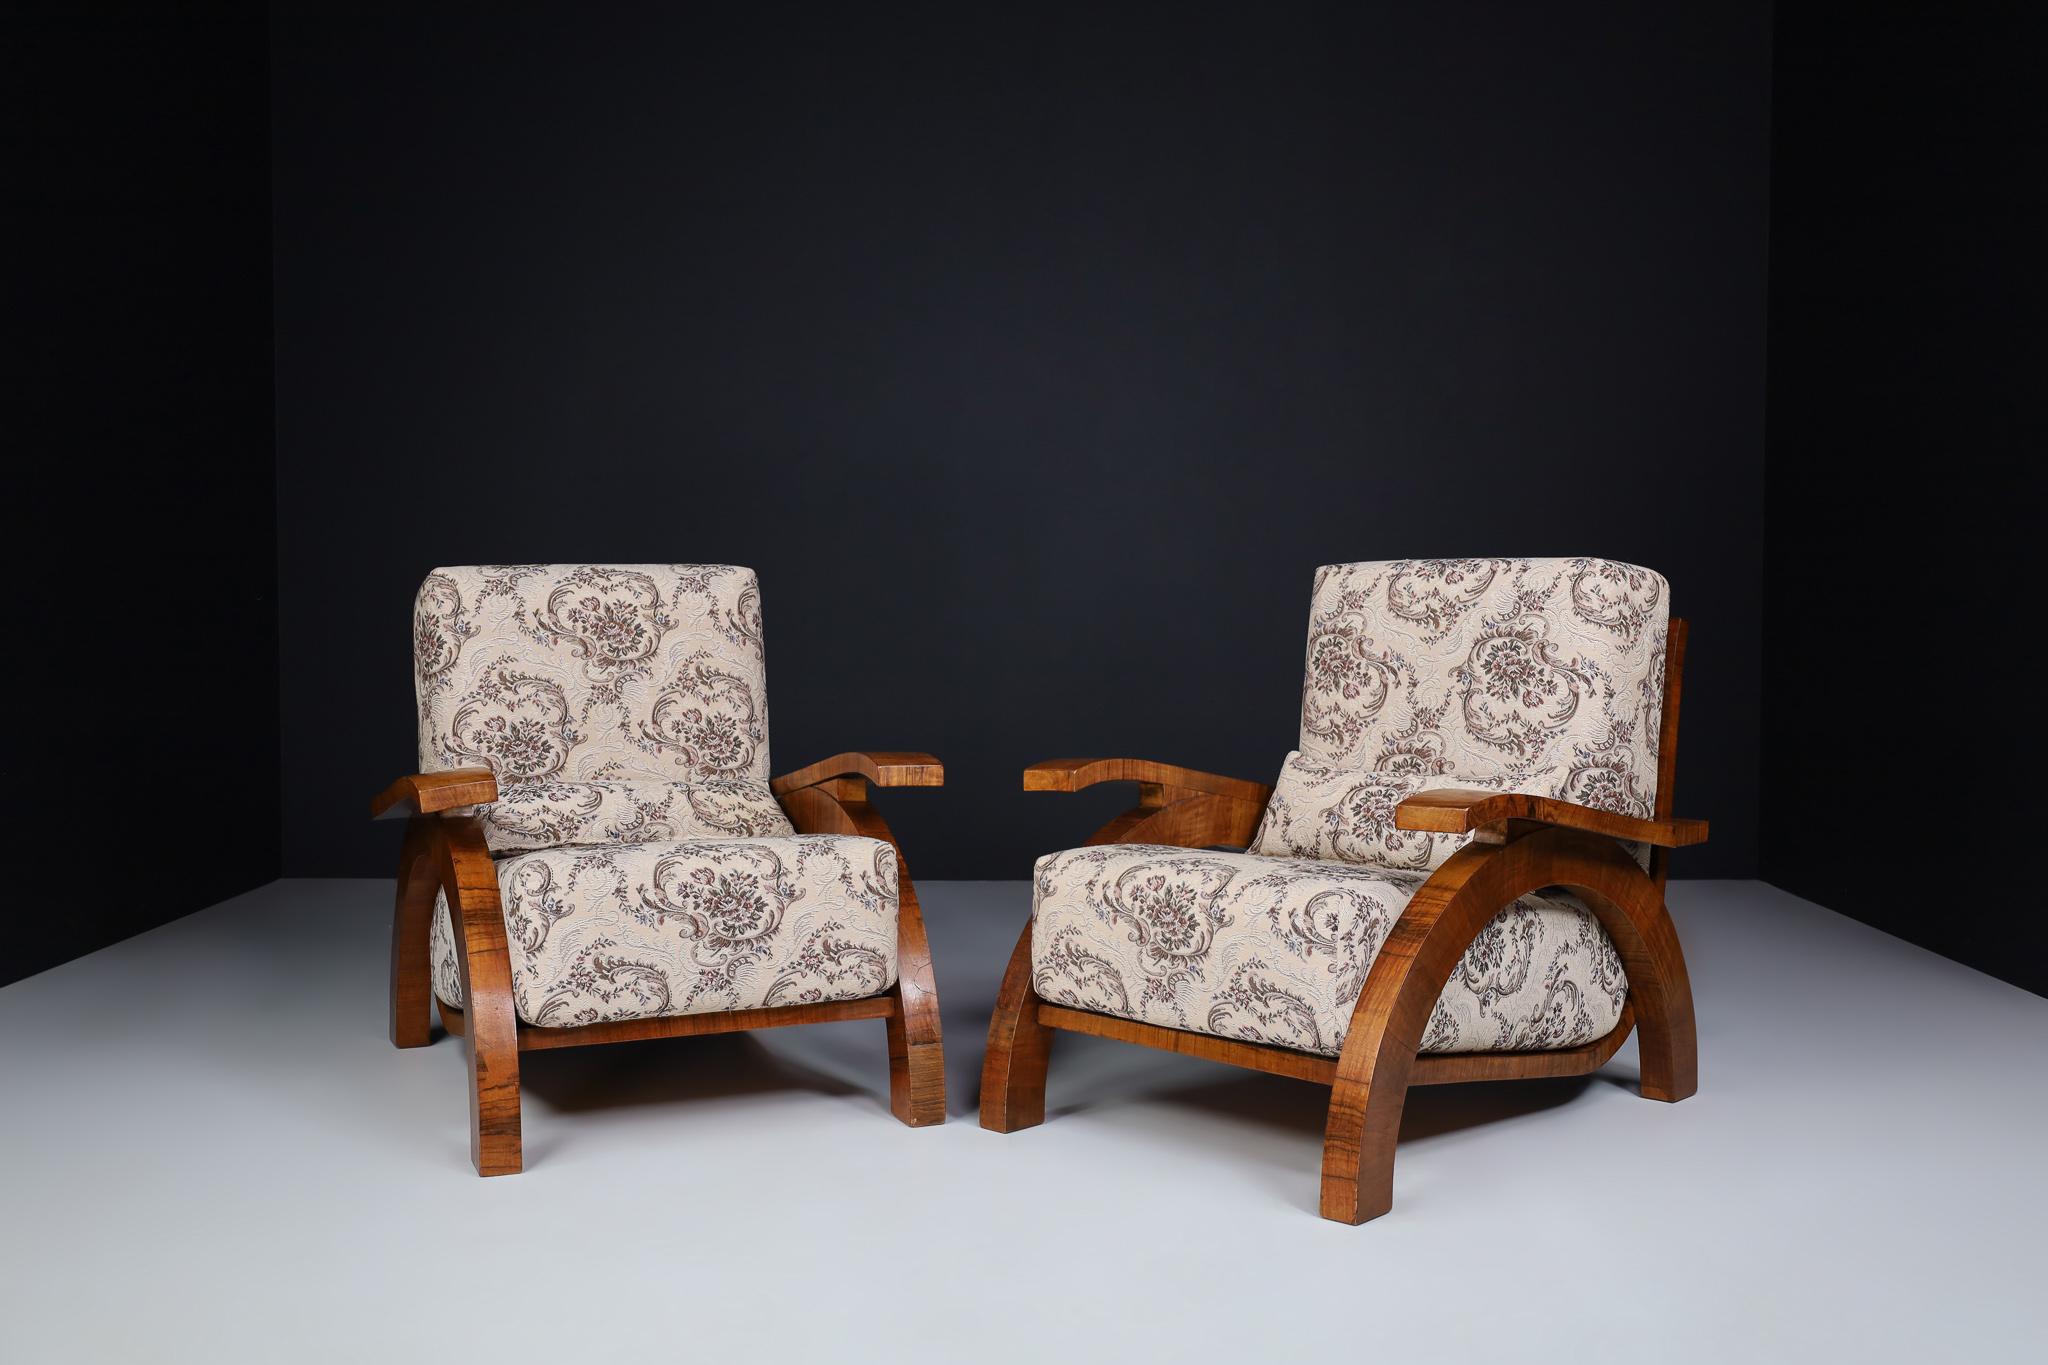 Large Monumental Art Deco armchairs in Walnut and Original Fabric, Prague 1930s

Set of two Large monumental Art Deco armchairs in walnut and original fabric in good vintage condition, Czech Republic 1930s. These monumental Xl size armchairs -